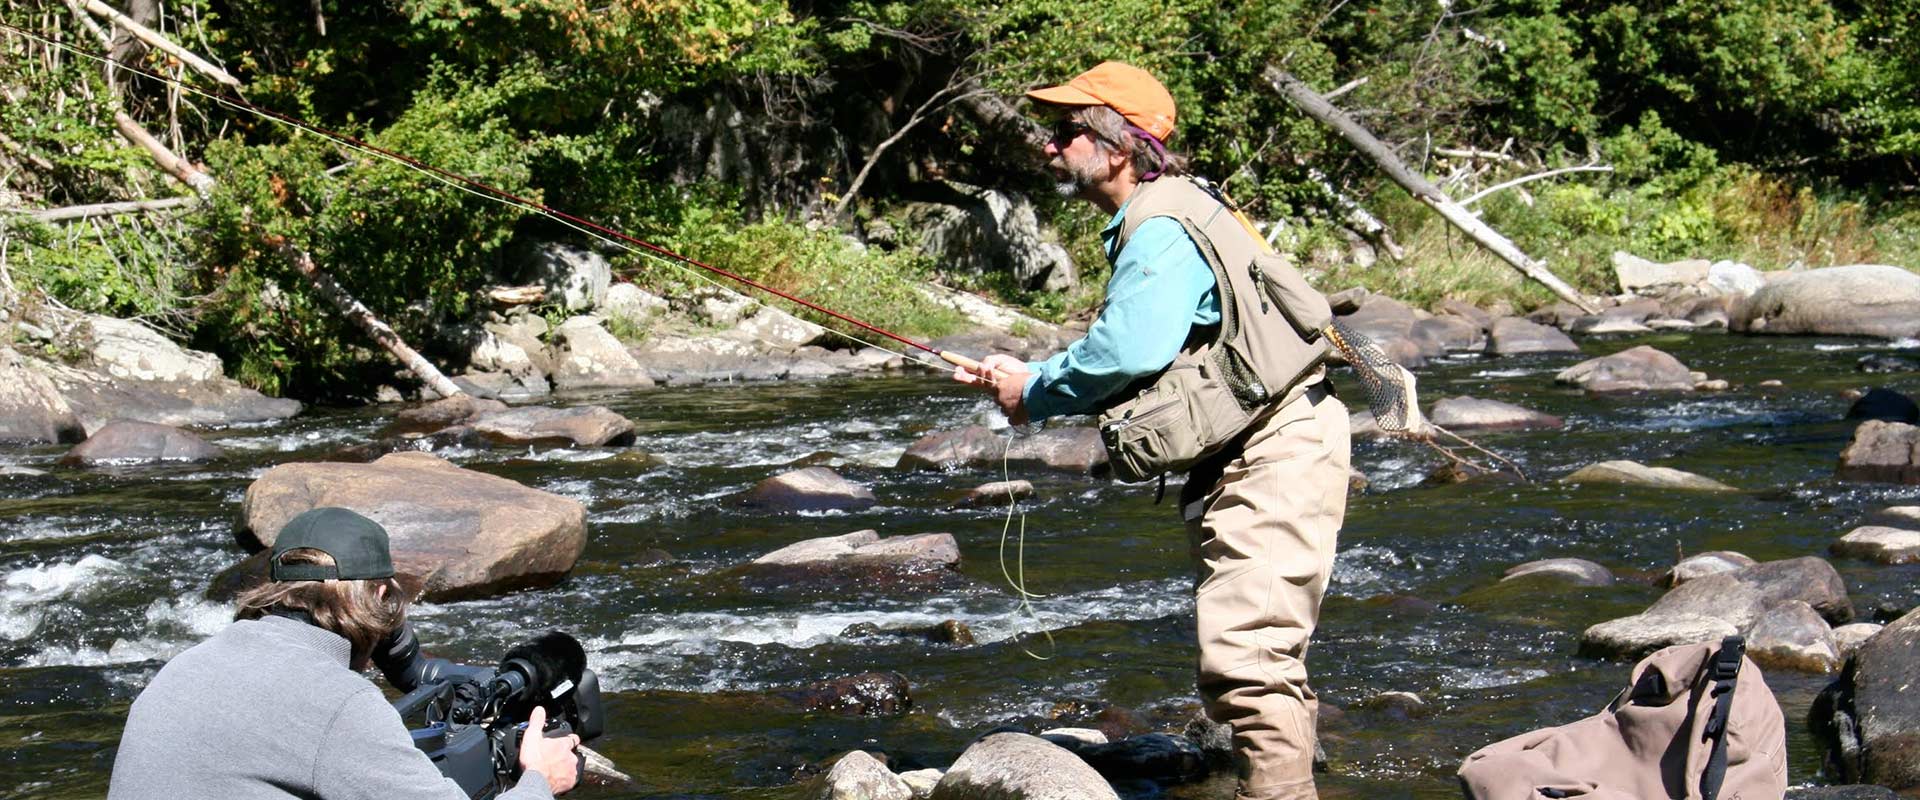 https://www.thenewflyfisher.com/wp-content/uploads/2017/01/orvis-guide-to-fly-fishing-tnff.jpg